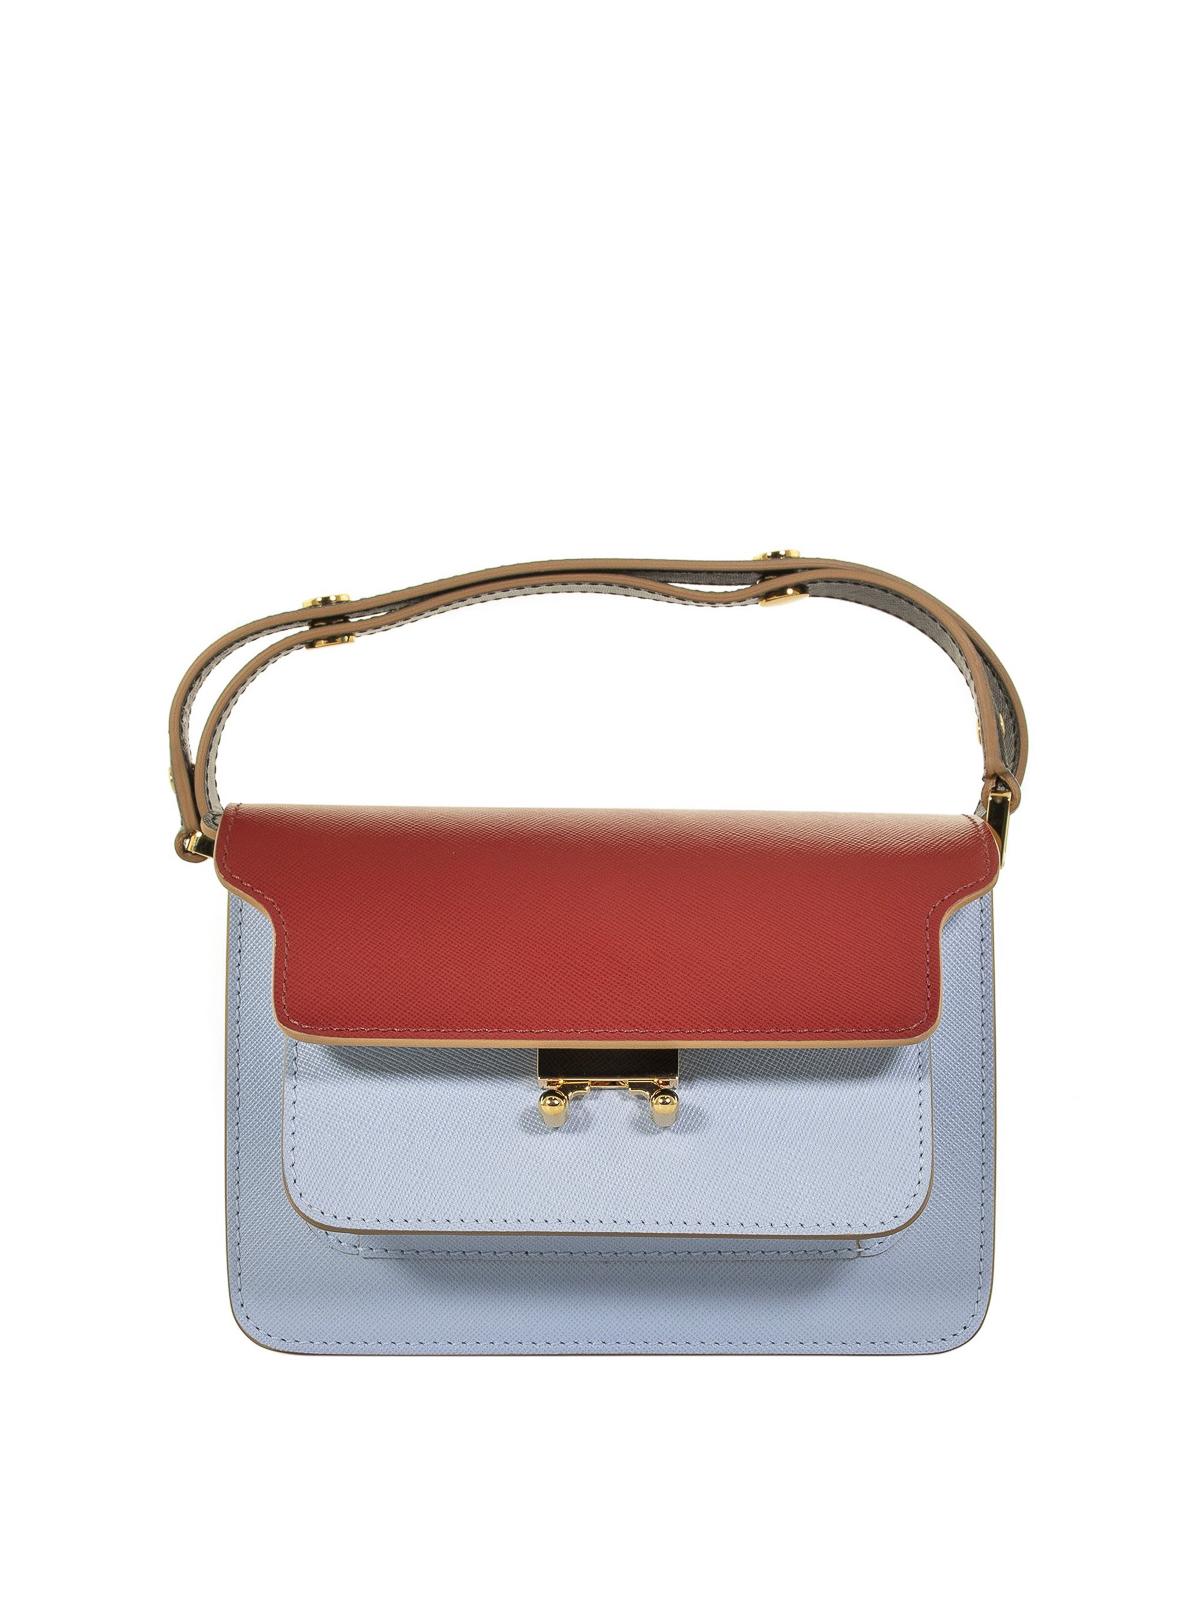 Marni Colour Block Leather Shoulder Bag in Red - Lyst